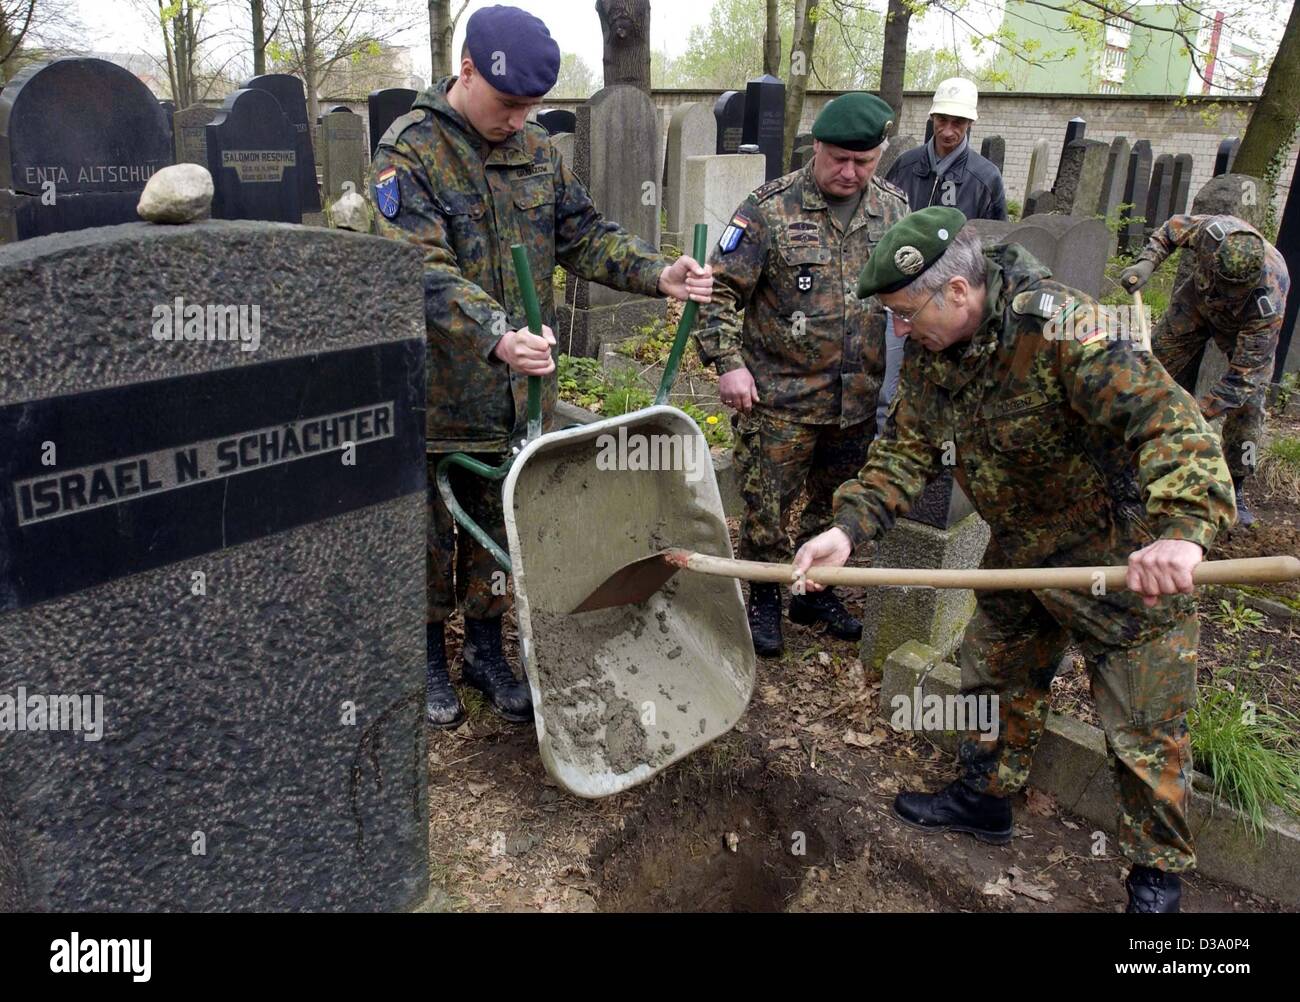 (dpa) - Soldiers of the German Bundeswehr lay the foundations for new tombstones at the cemetery of the Jewish community in Berlin, 18 April 2002. The soldiers set up tombstones for the Jews who were assassinated in the concentration camps of the Nazis during World War II. Stock Photo